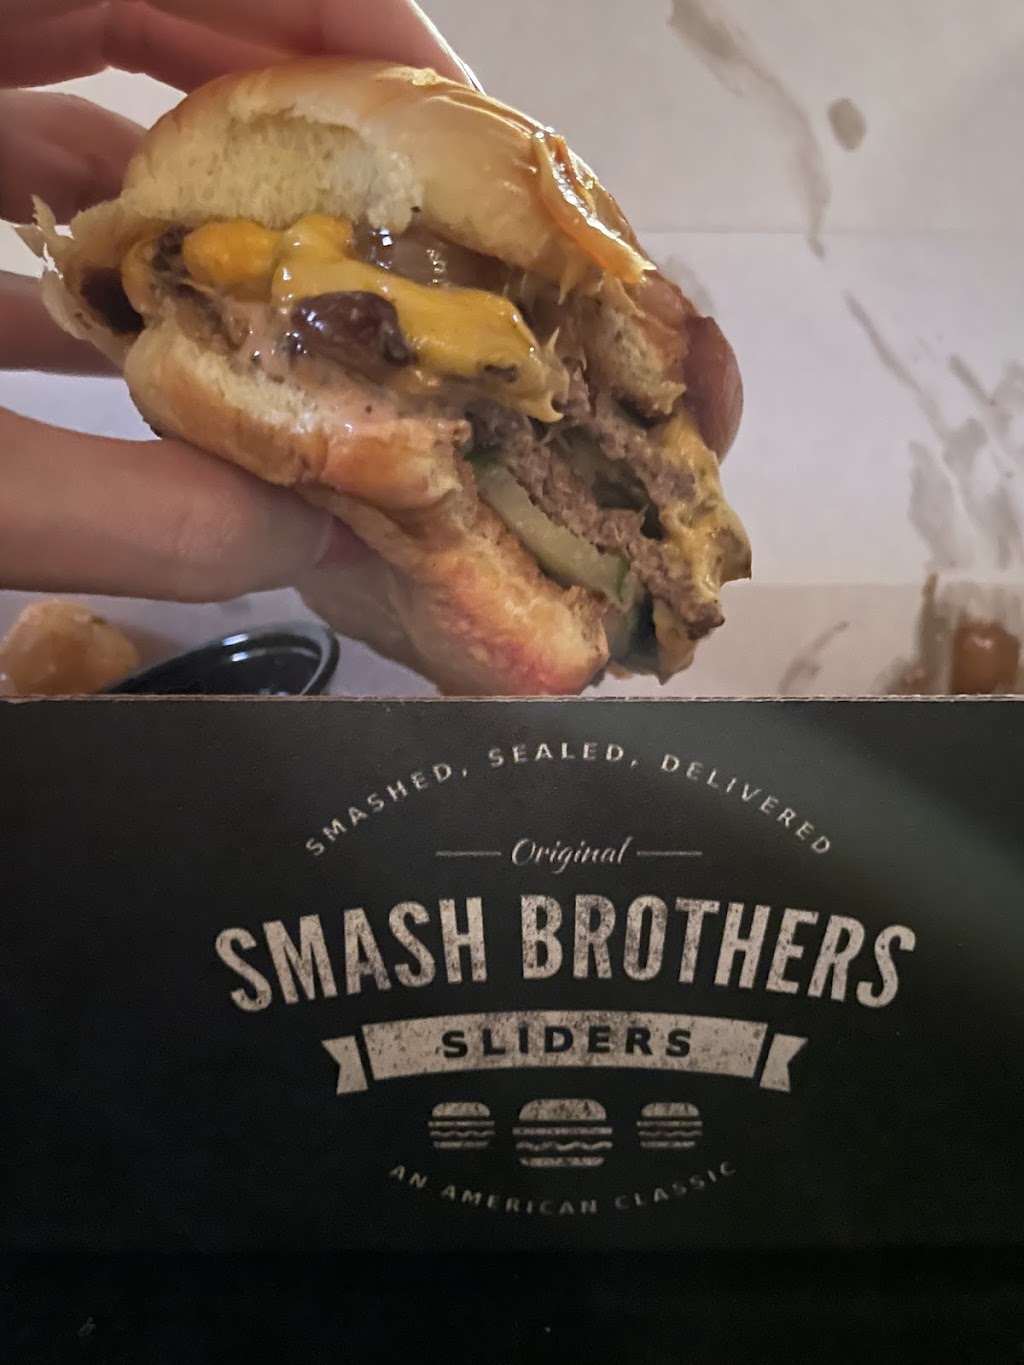 Smash Brothers Sliders | restaurant | 1291 W 3rd Ave, Columbus, OH 43212, USA | 6146363835 OR +1 614-636-3835